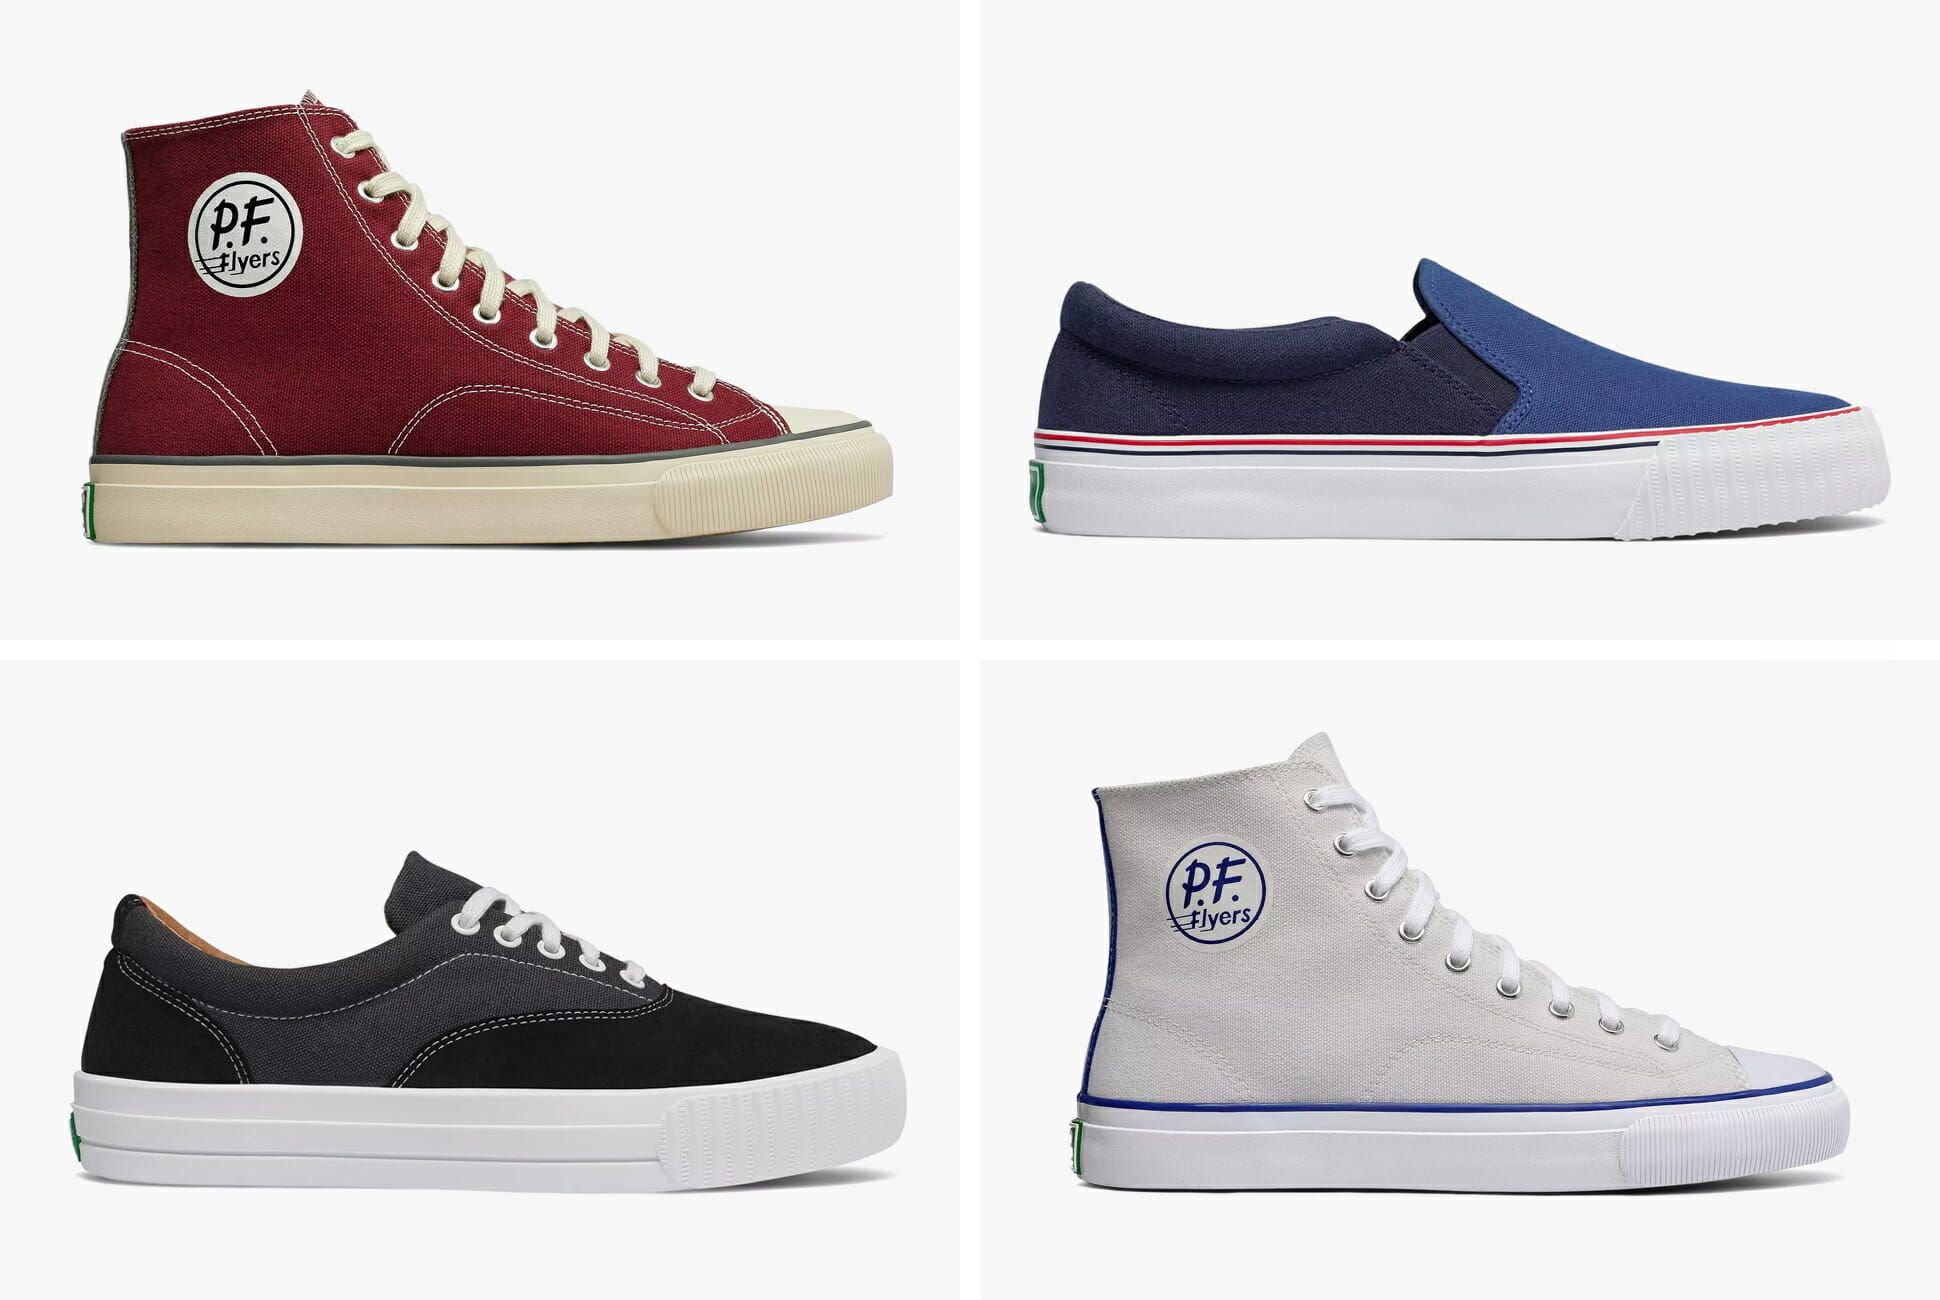 pf flyers for sale near me